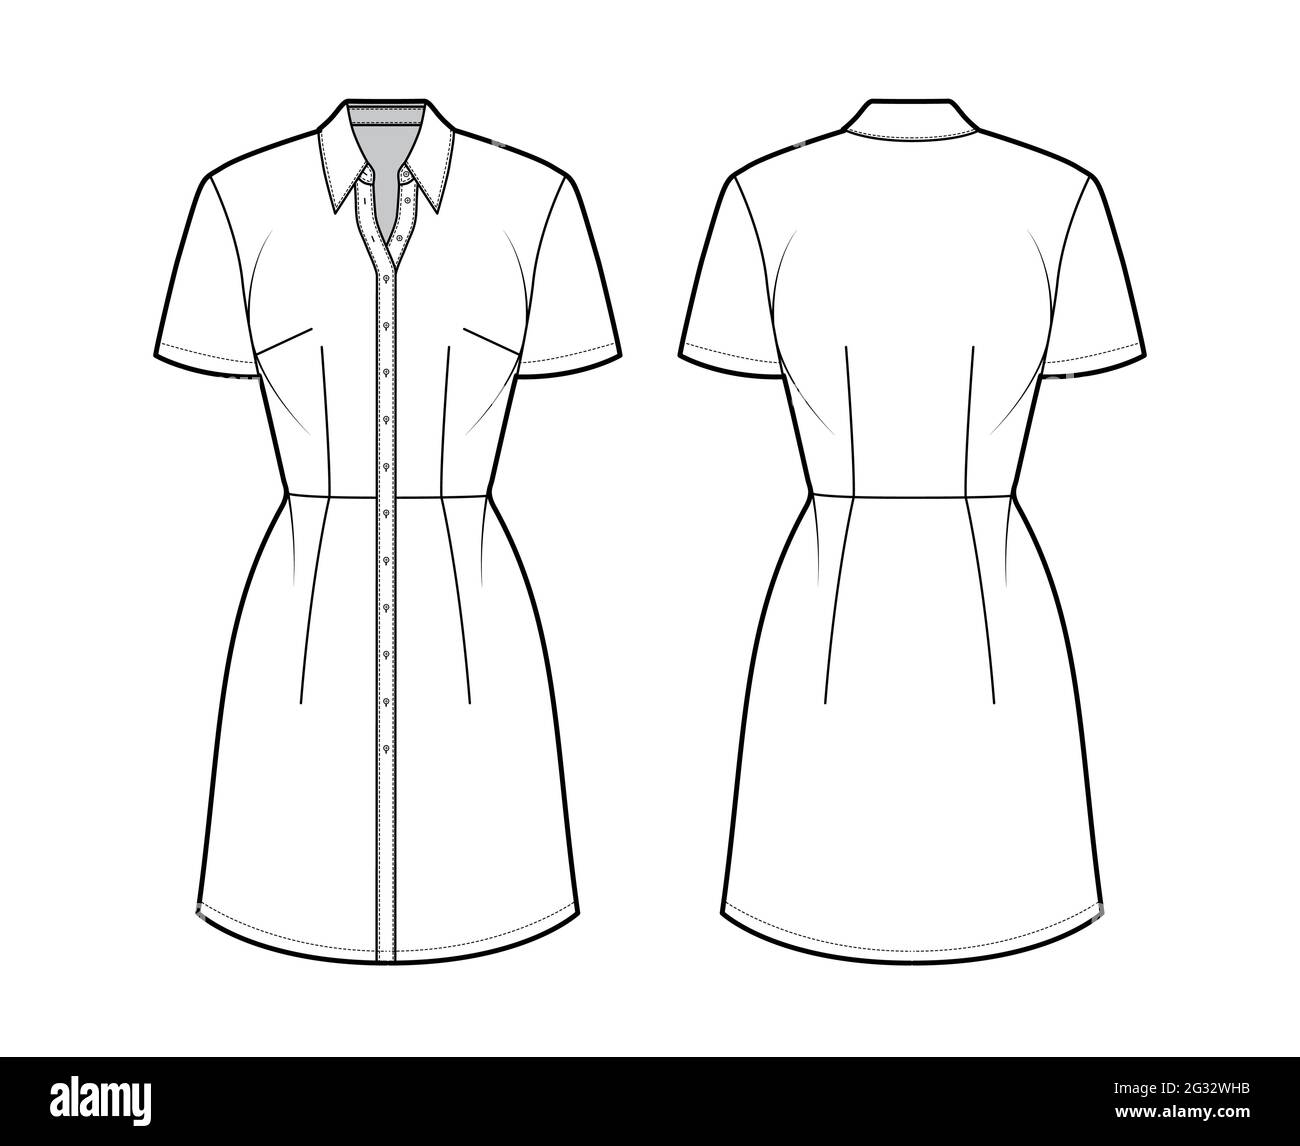 Dress shirt technical fashion illustration with short sleeves, fitted body, knee length pencil skirt, classic collar, button closure. Flat apparel front, back, white color. Women men unisex CAD mockup Stock Vector